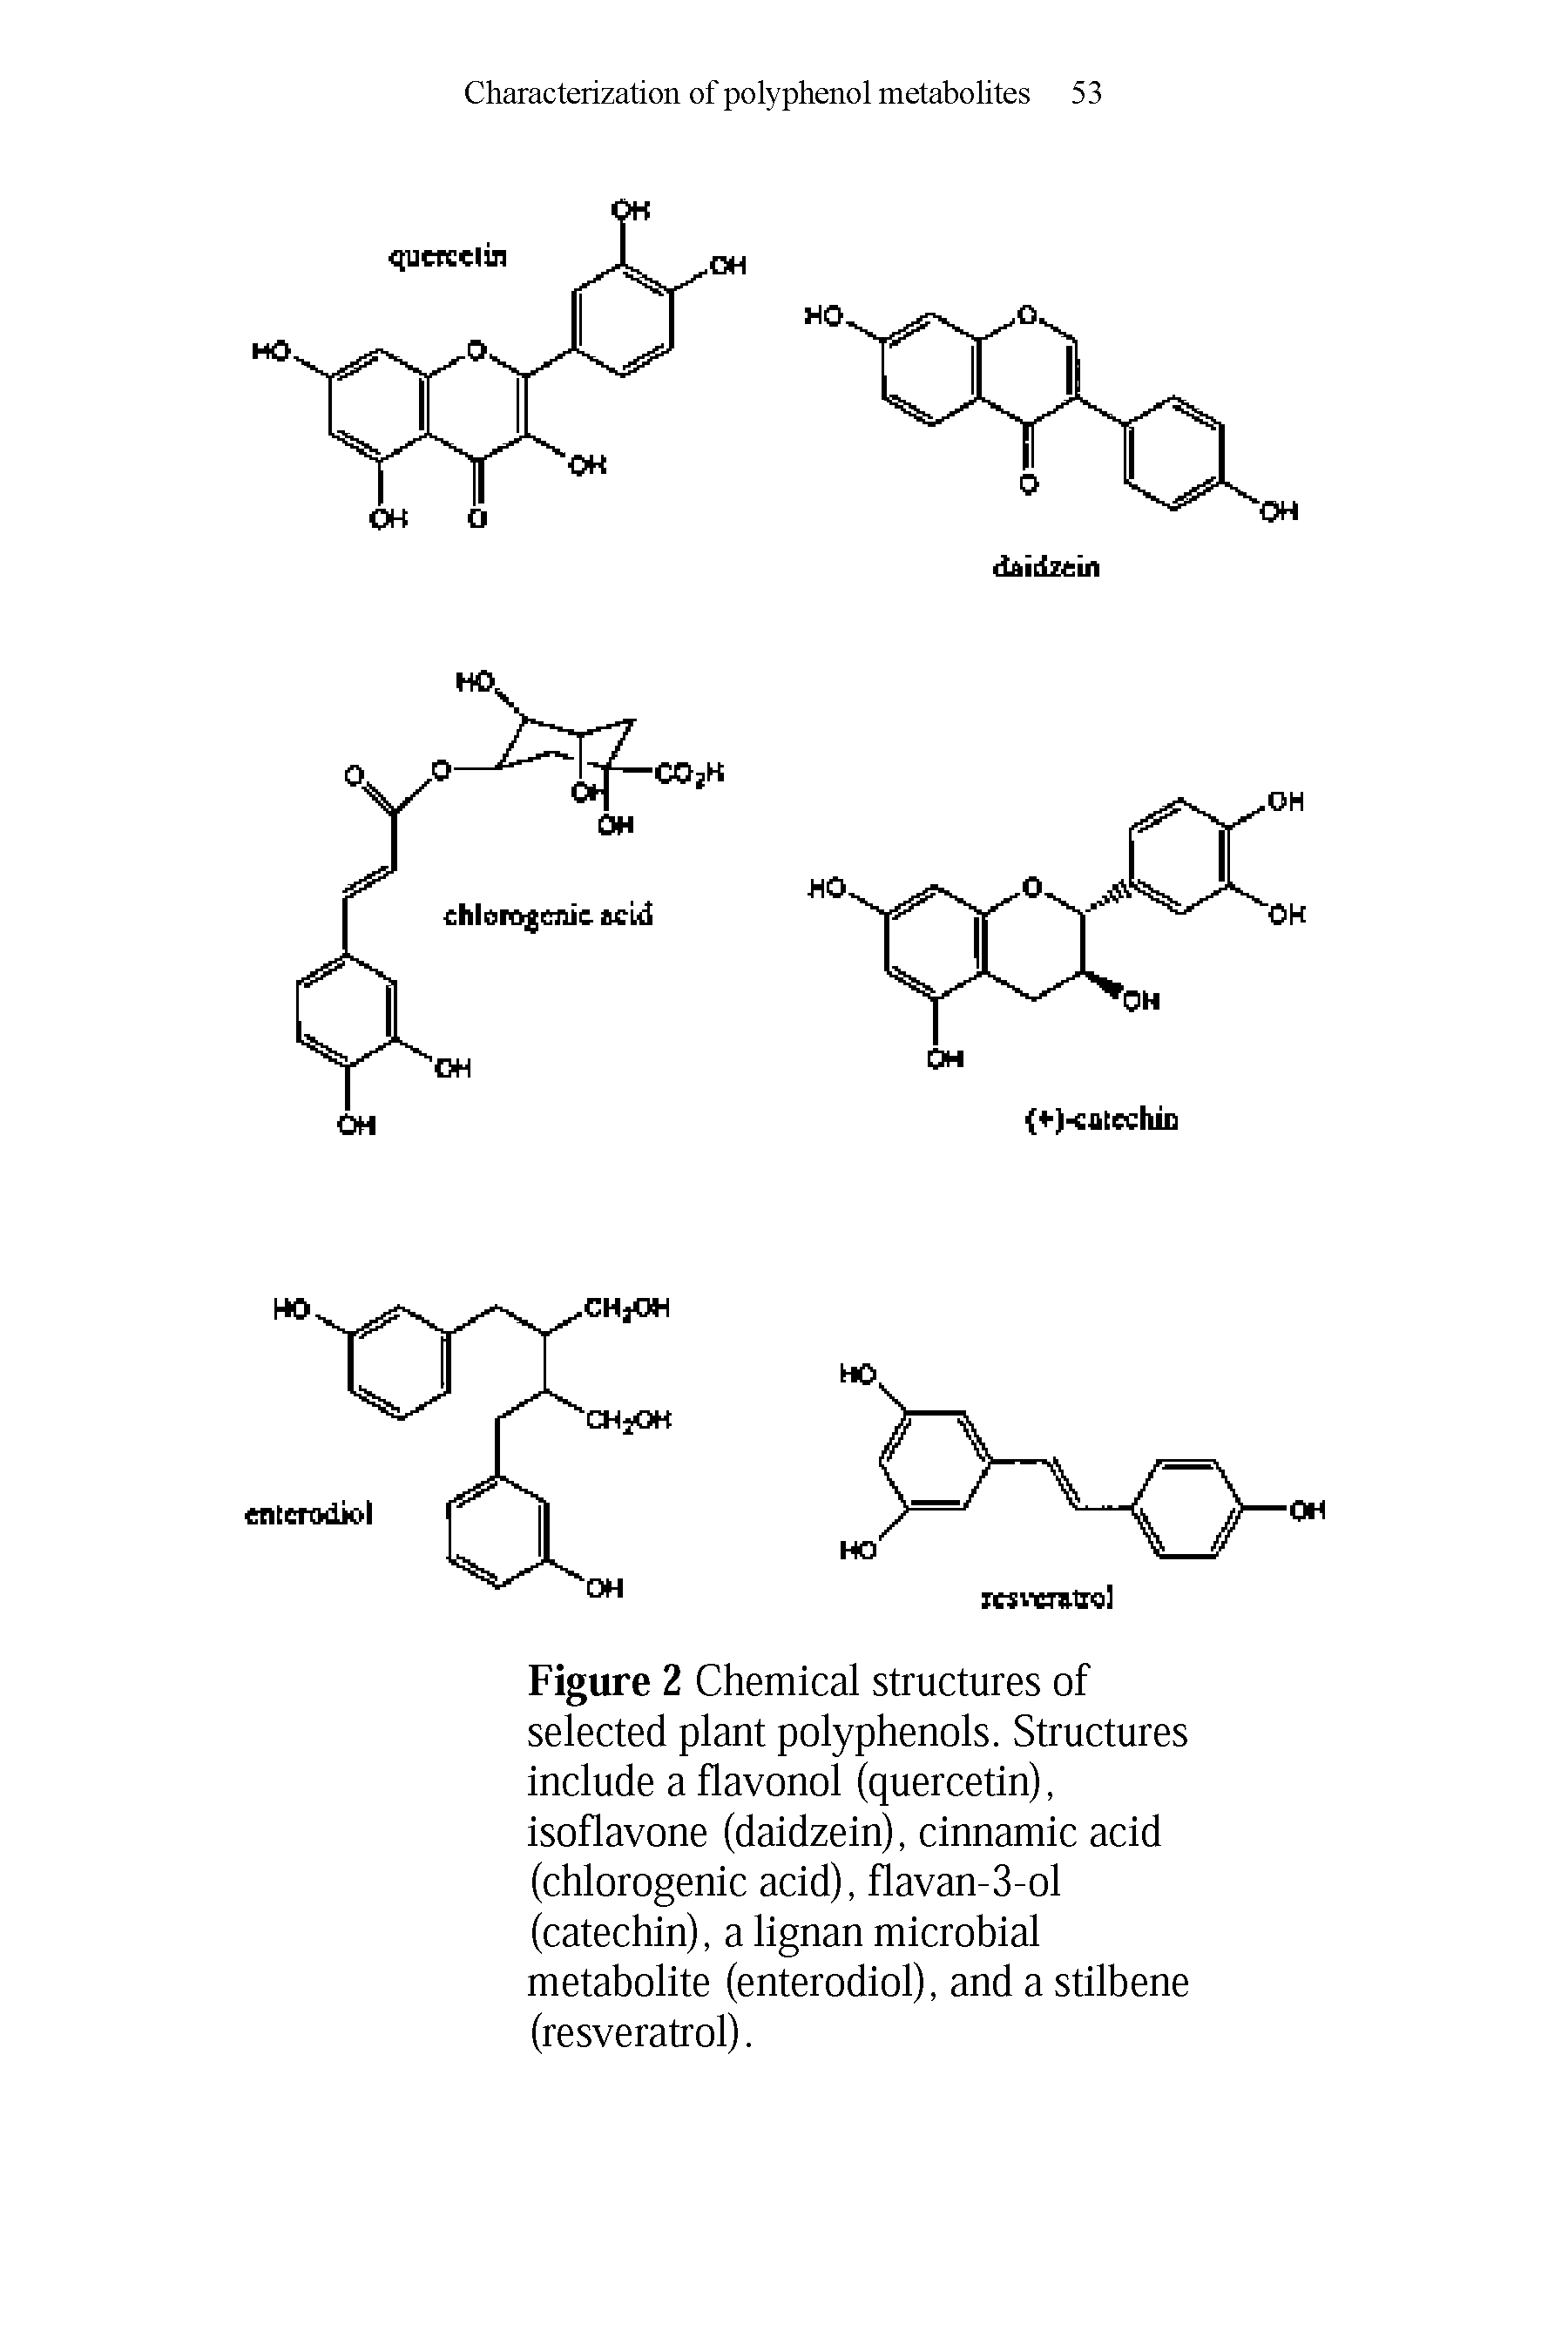 Figure 2 Chemical structures of selected plant polyphenols. Structures include a flavonol (quercetin), isoflavone (daidzein), cinnamic acid (chlorogenic acid), flavan-3-ol (catechin), a lignan microbial metabolite (enterodiol), and a stilbene (resveratrol).